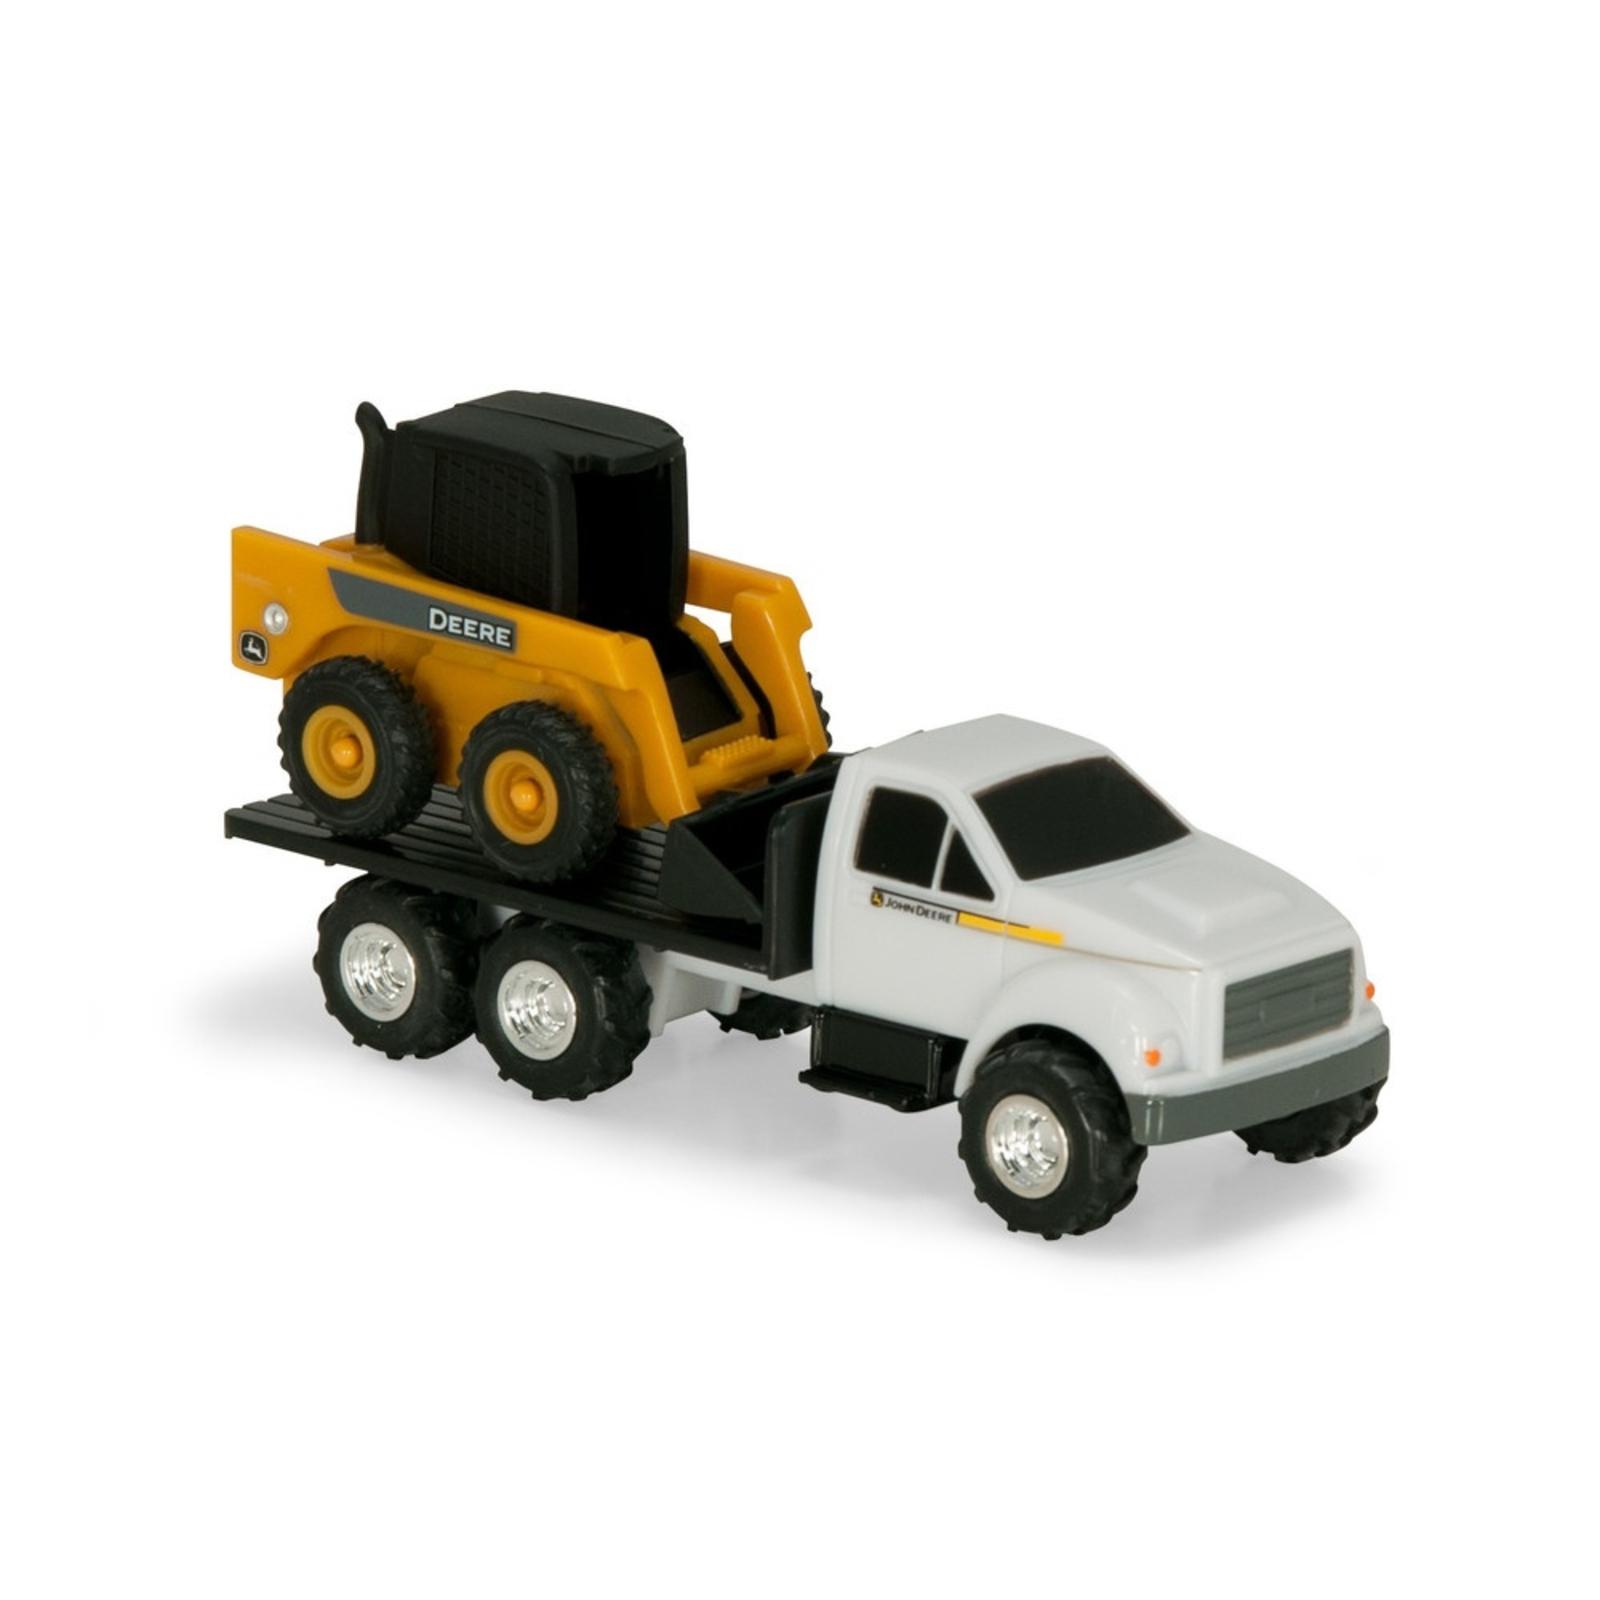 Flatbed Truck with Skid Steer